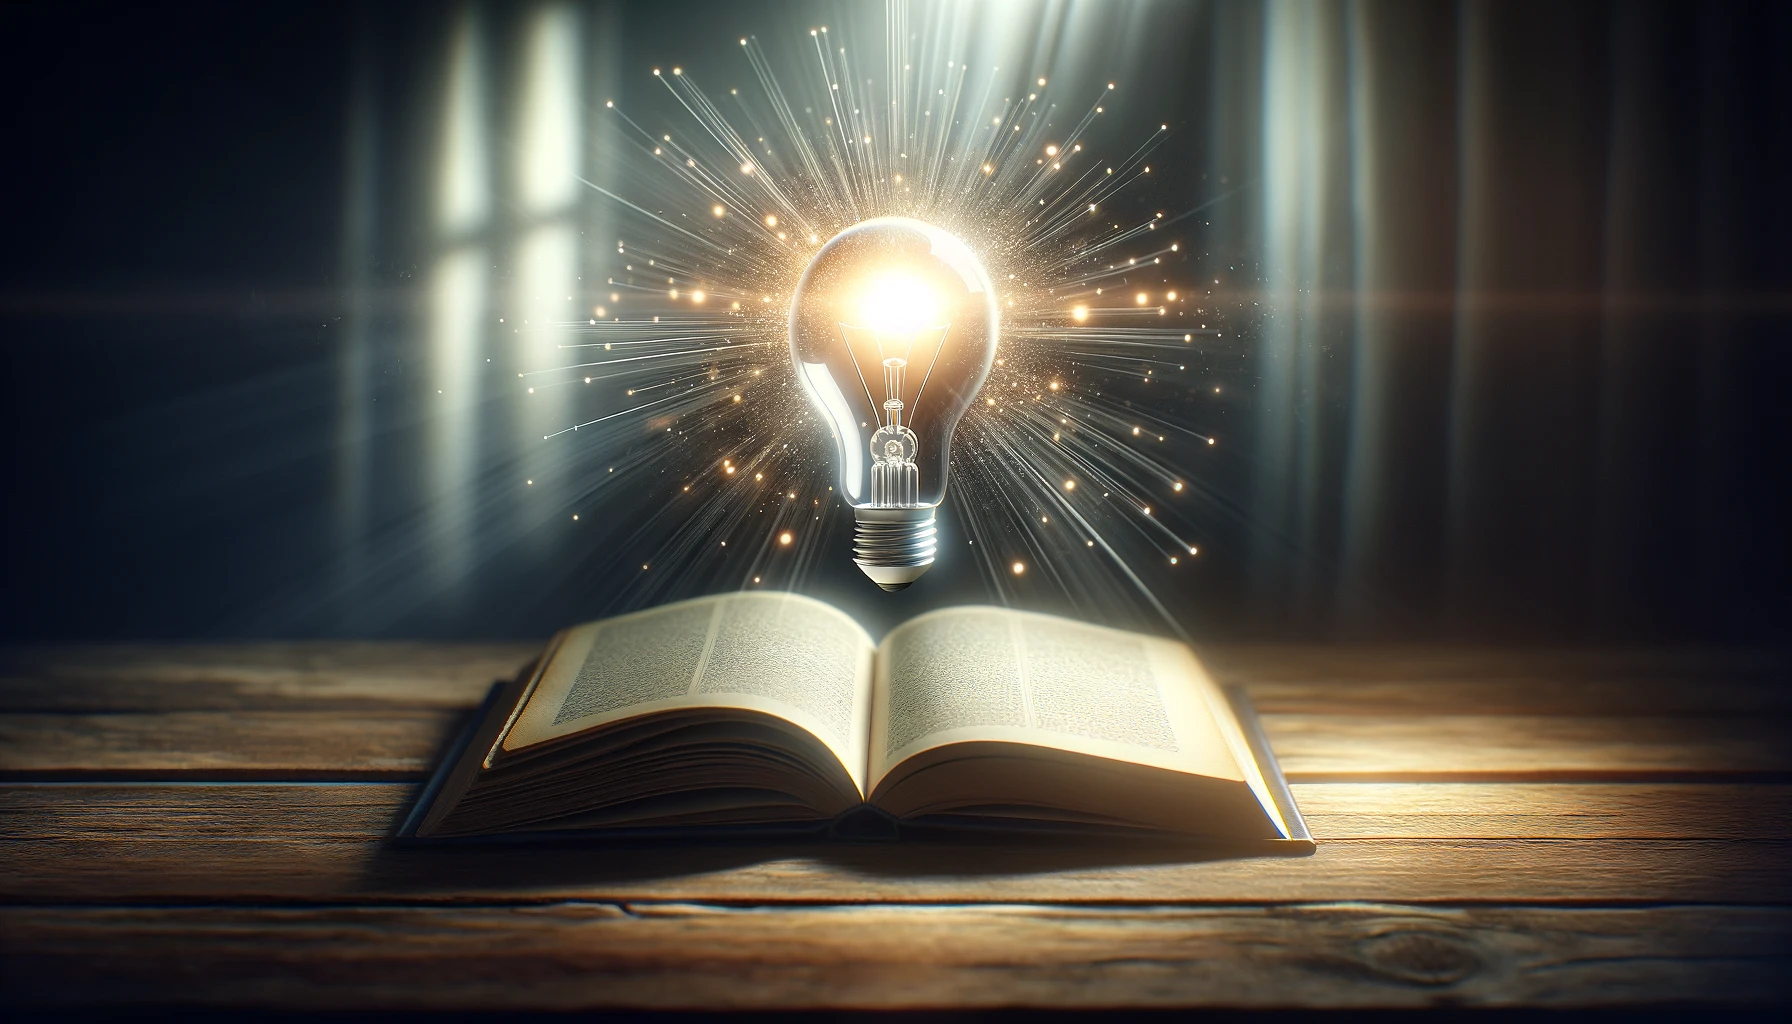 A wide, photorealistic image depicting an open book on a wooden desk, radiating a soft glow, with a bright lightbulb floating above it, symbolizing the enlightenment and innovation achieved through learning, set against a softly blurred background to emphasize focus and contemplation.